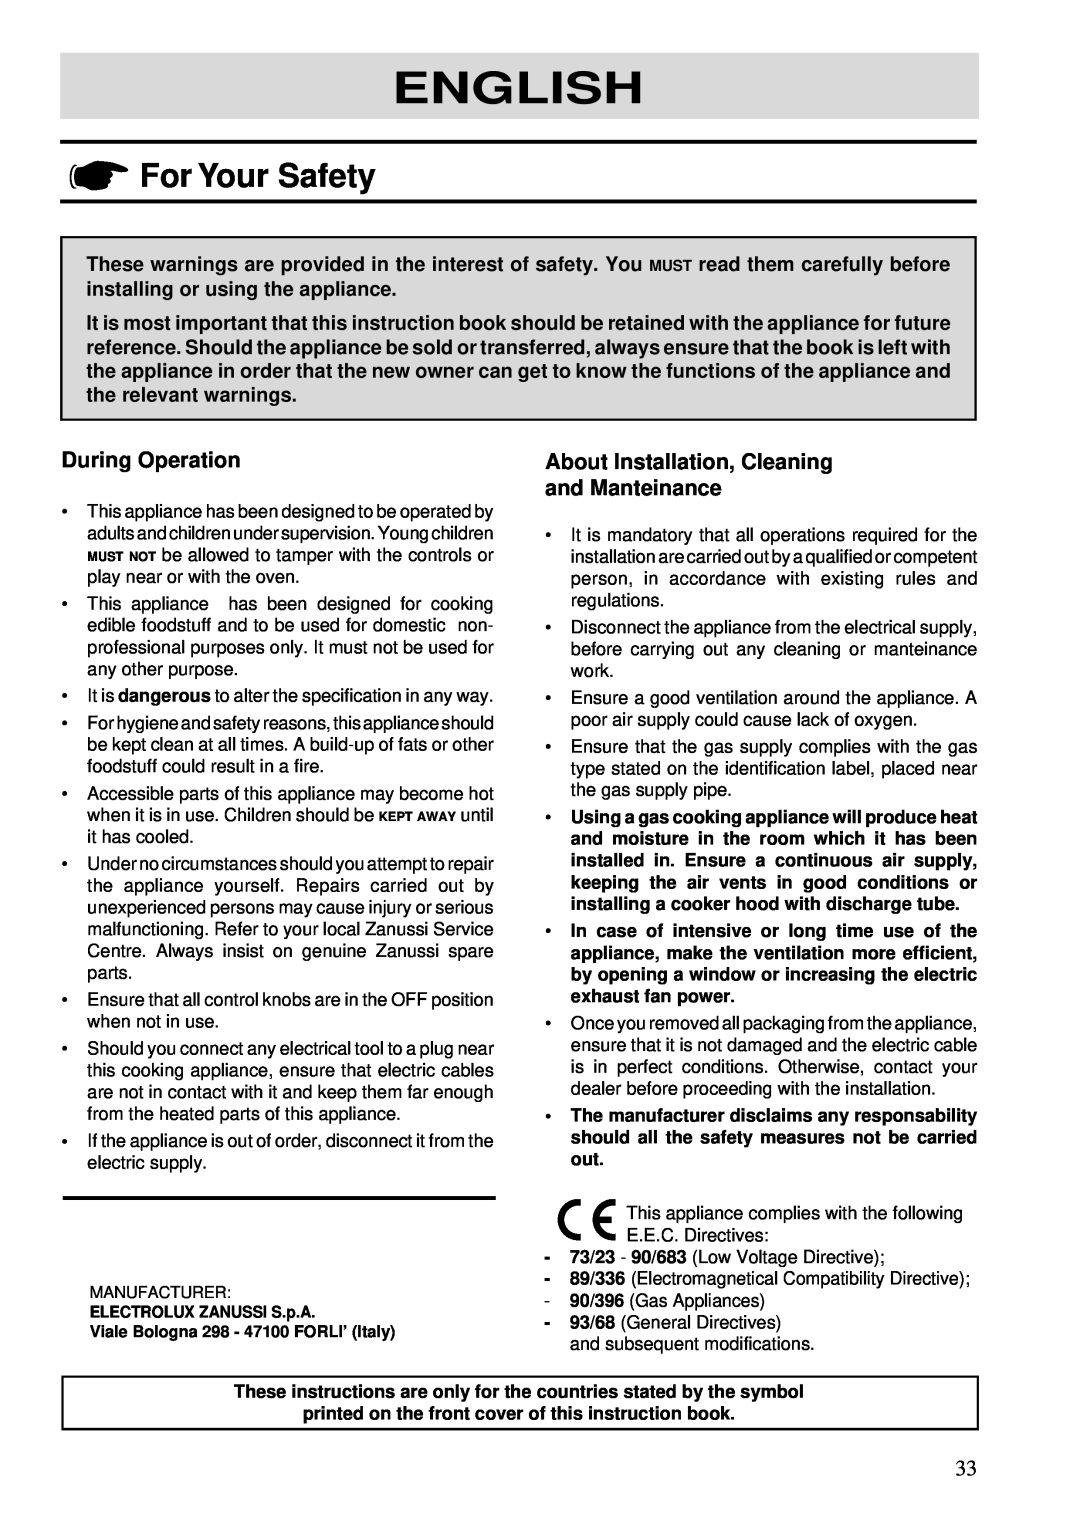 Zanussi ZGF 983 manual For Your Safety, During Operation, About Installation, Cleaning and Manteinance, English 